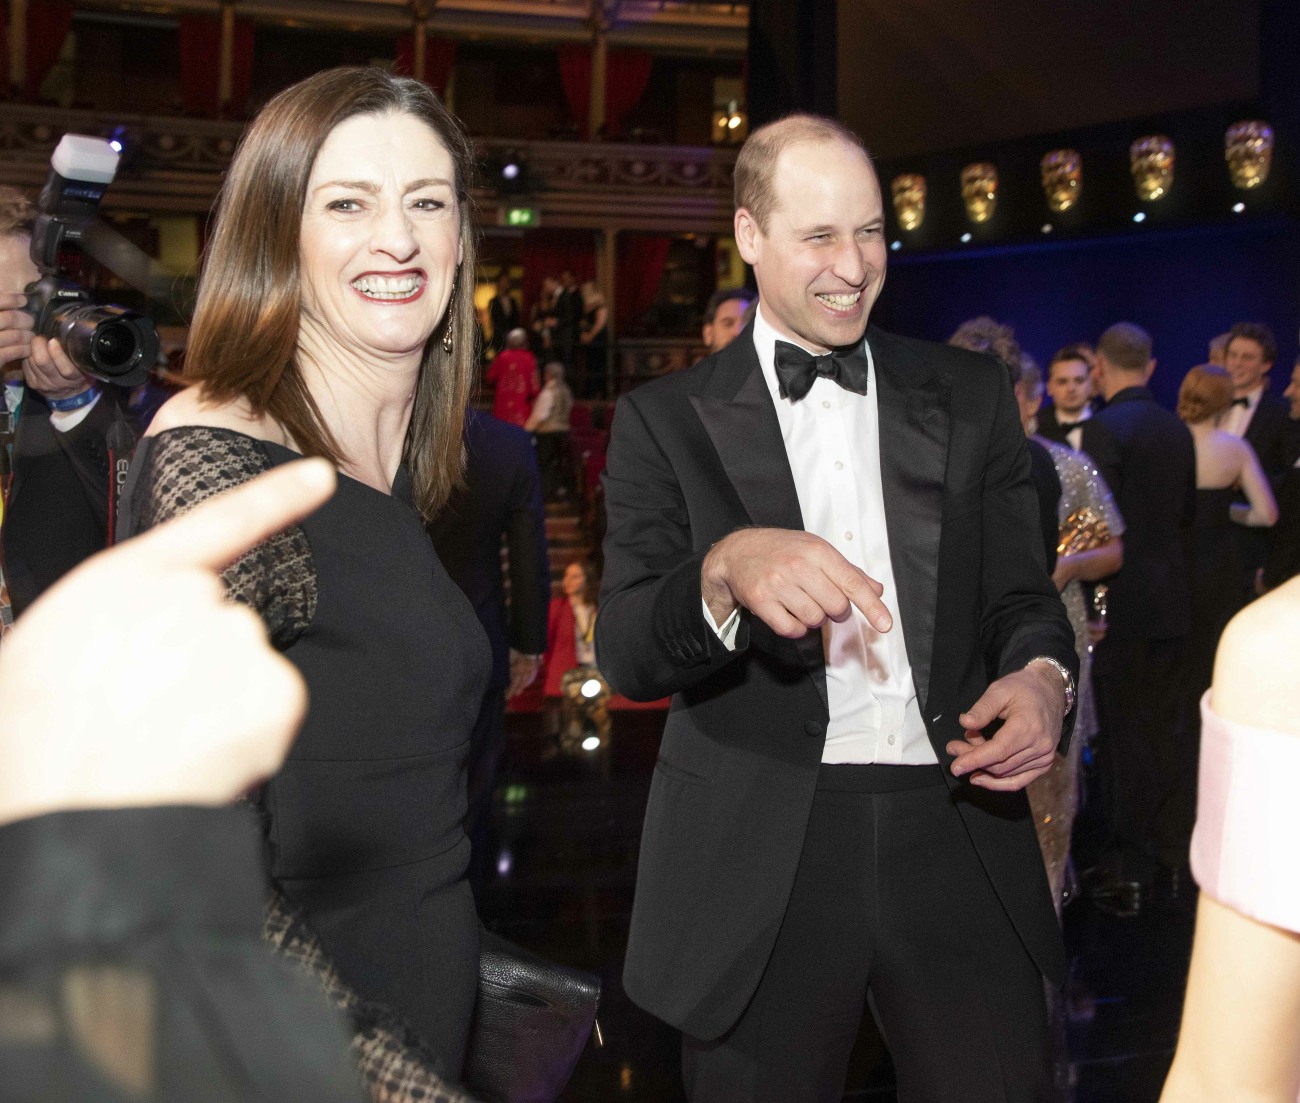 The Duke and Duchess of Cambridge attend the EE British Academy Film Awards ceremony at the Royal Albert Hall.